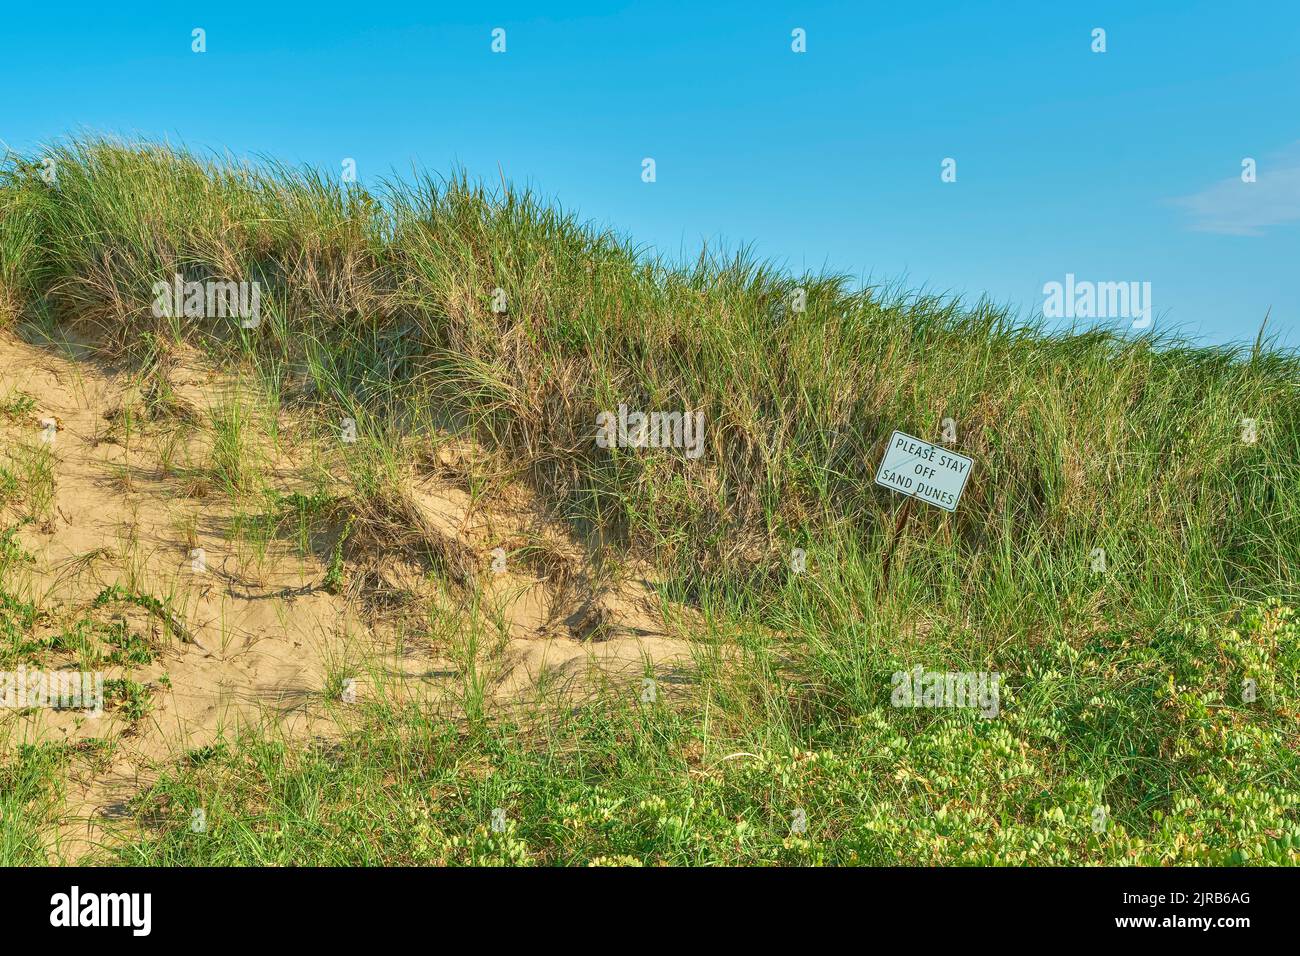 Sign requesting visitors to Breakwater Bead in Port Hood Nova Scotia to stay off the evironmentally sensitive sand dunes along the beach. Stock Photo